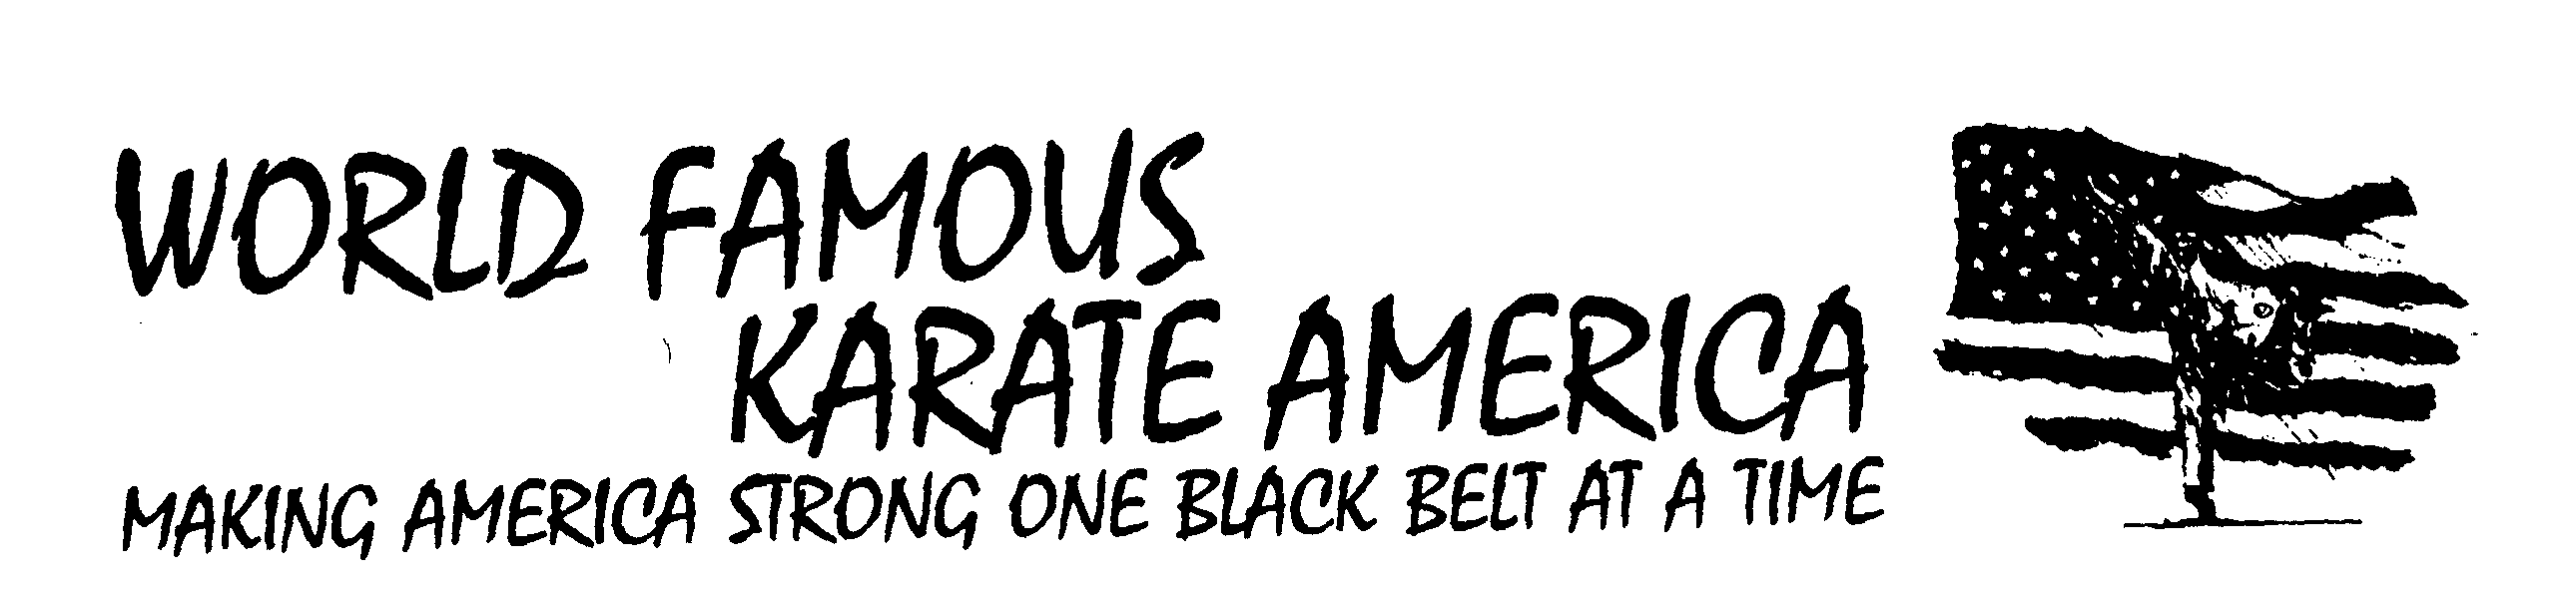  WORLD FAMOUS KARATE AMERICA MAKING AMERICA STRONG ONE BLACK BELT AT A TIME